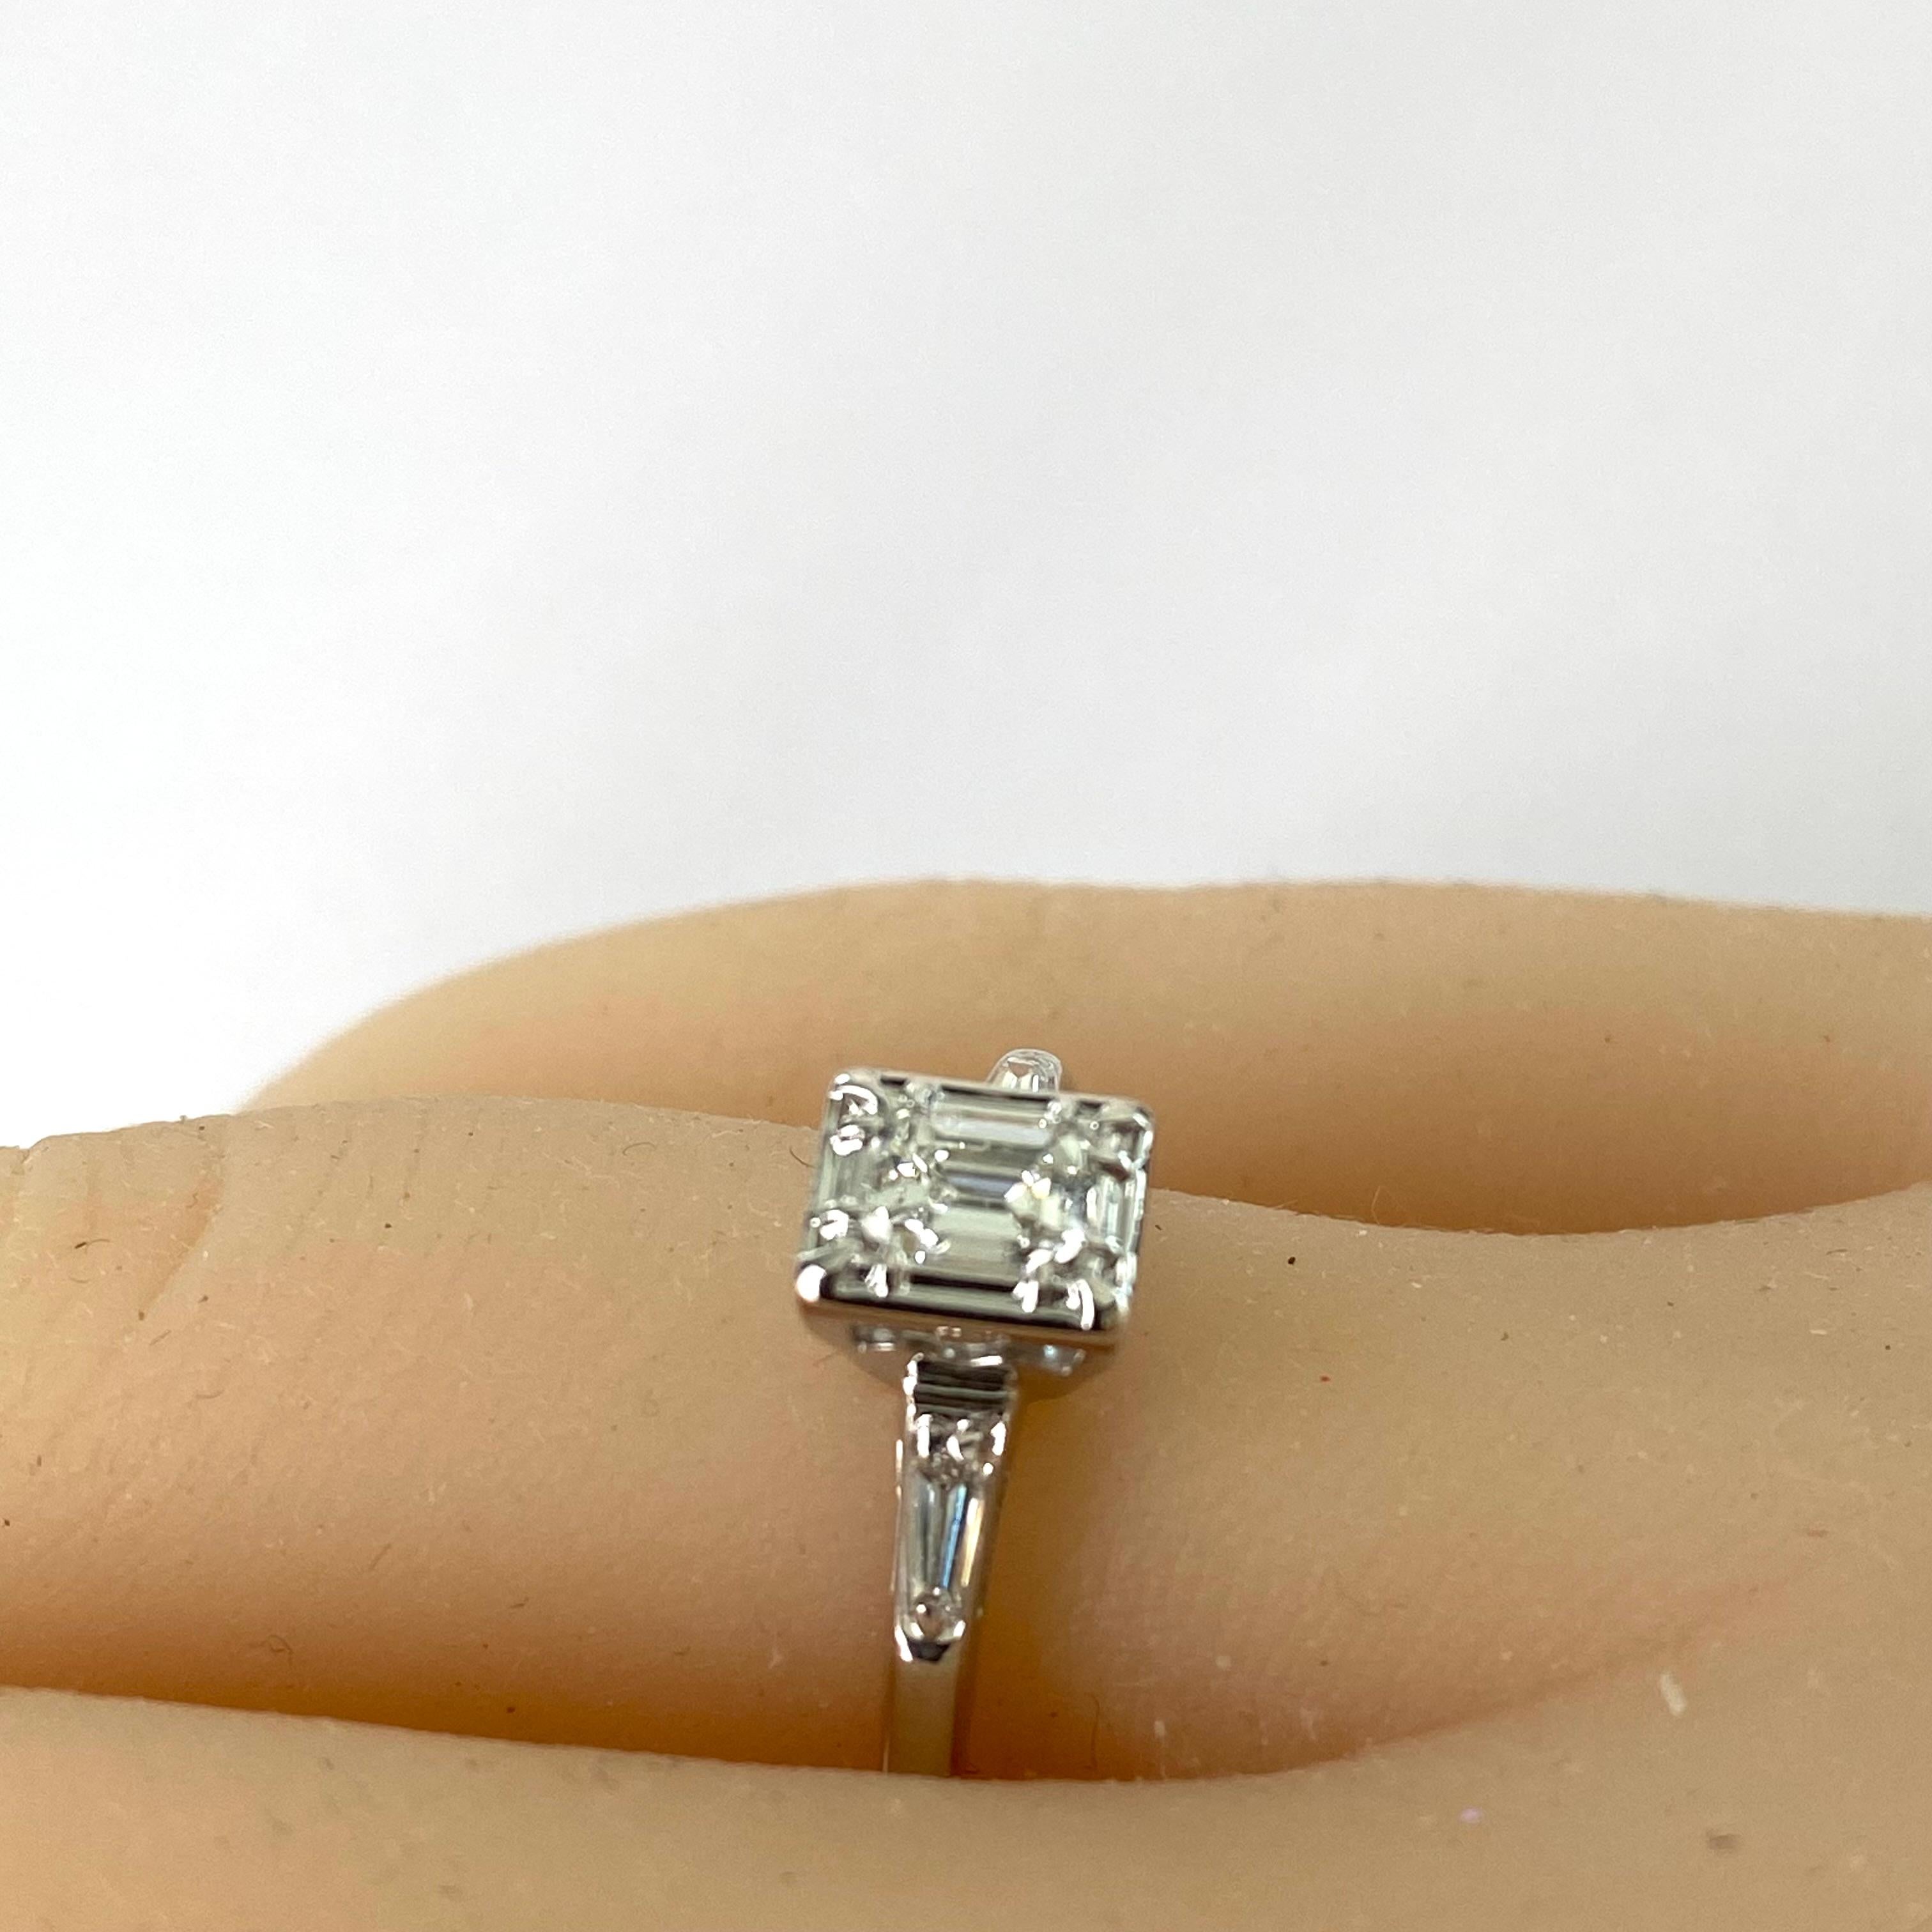 Stunning 14k Gold Diamond Engagement Ring with Emerald-Cut Center Diamond and Baguette Accents
Description:
Elevate your love story with this exquisite 14k gold diamond engagement ring, featuring a mesmerizing emerald-shaped center diamond